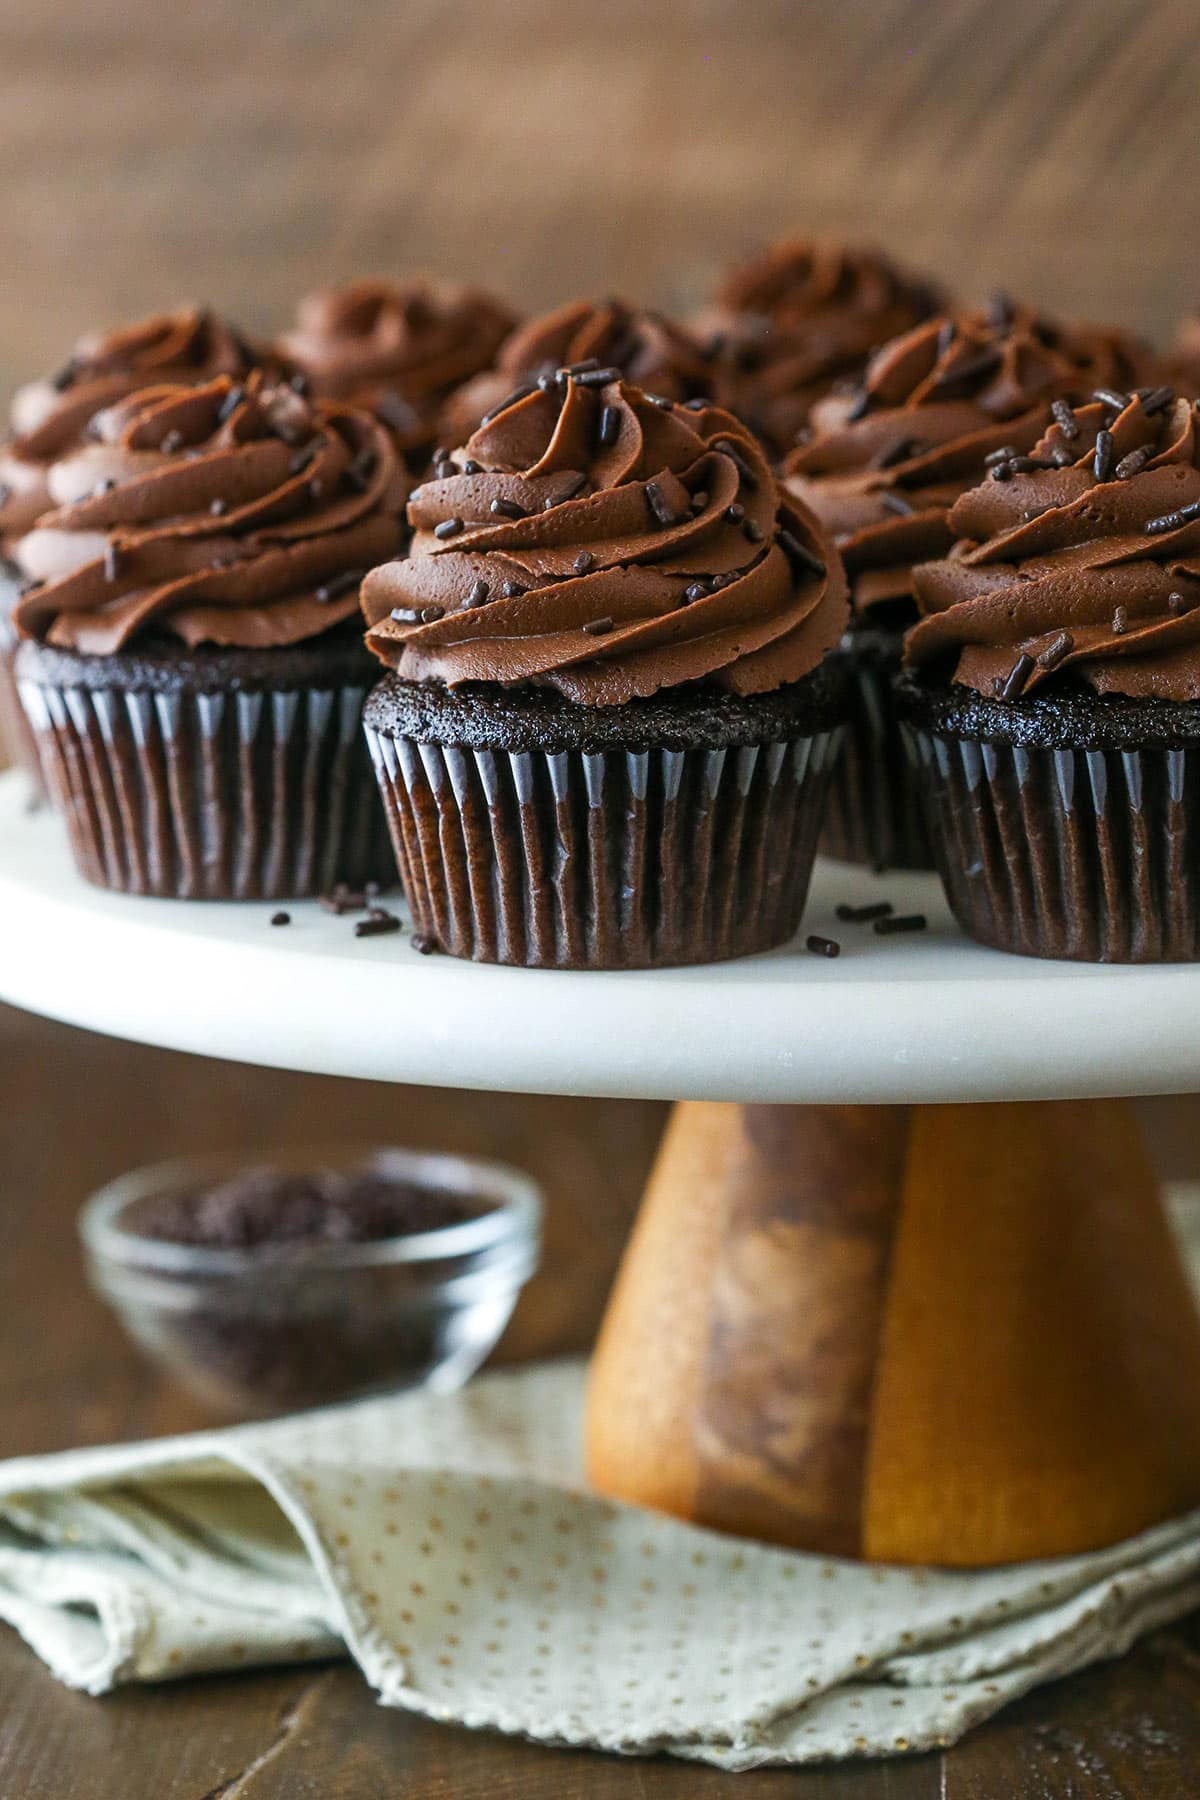 Moist chocolate cupcakes on a cake stand near a bowl of chocolate chips.